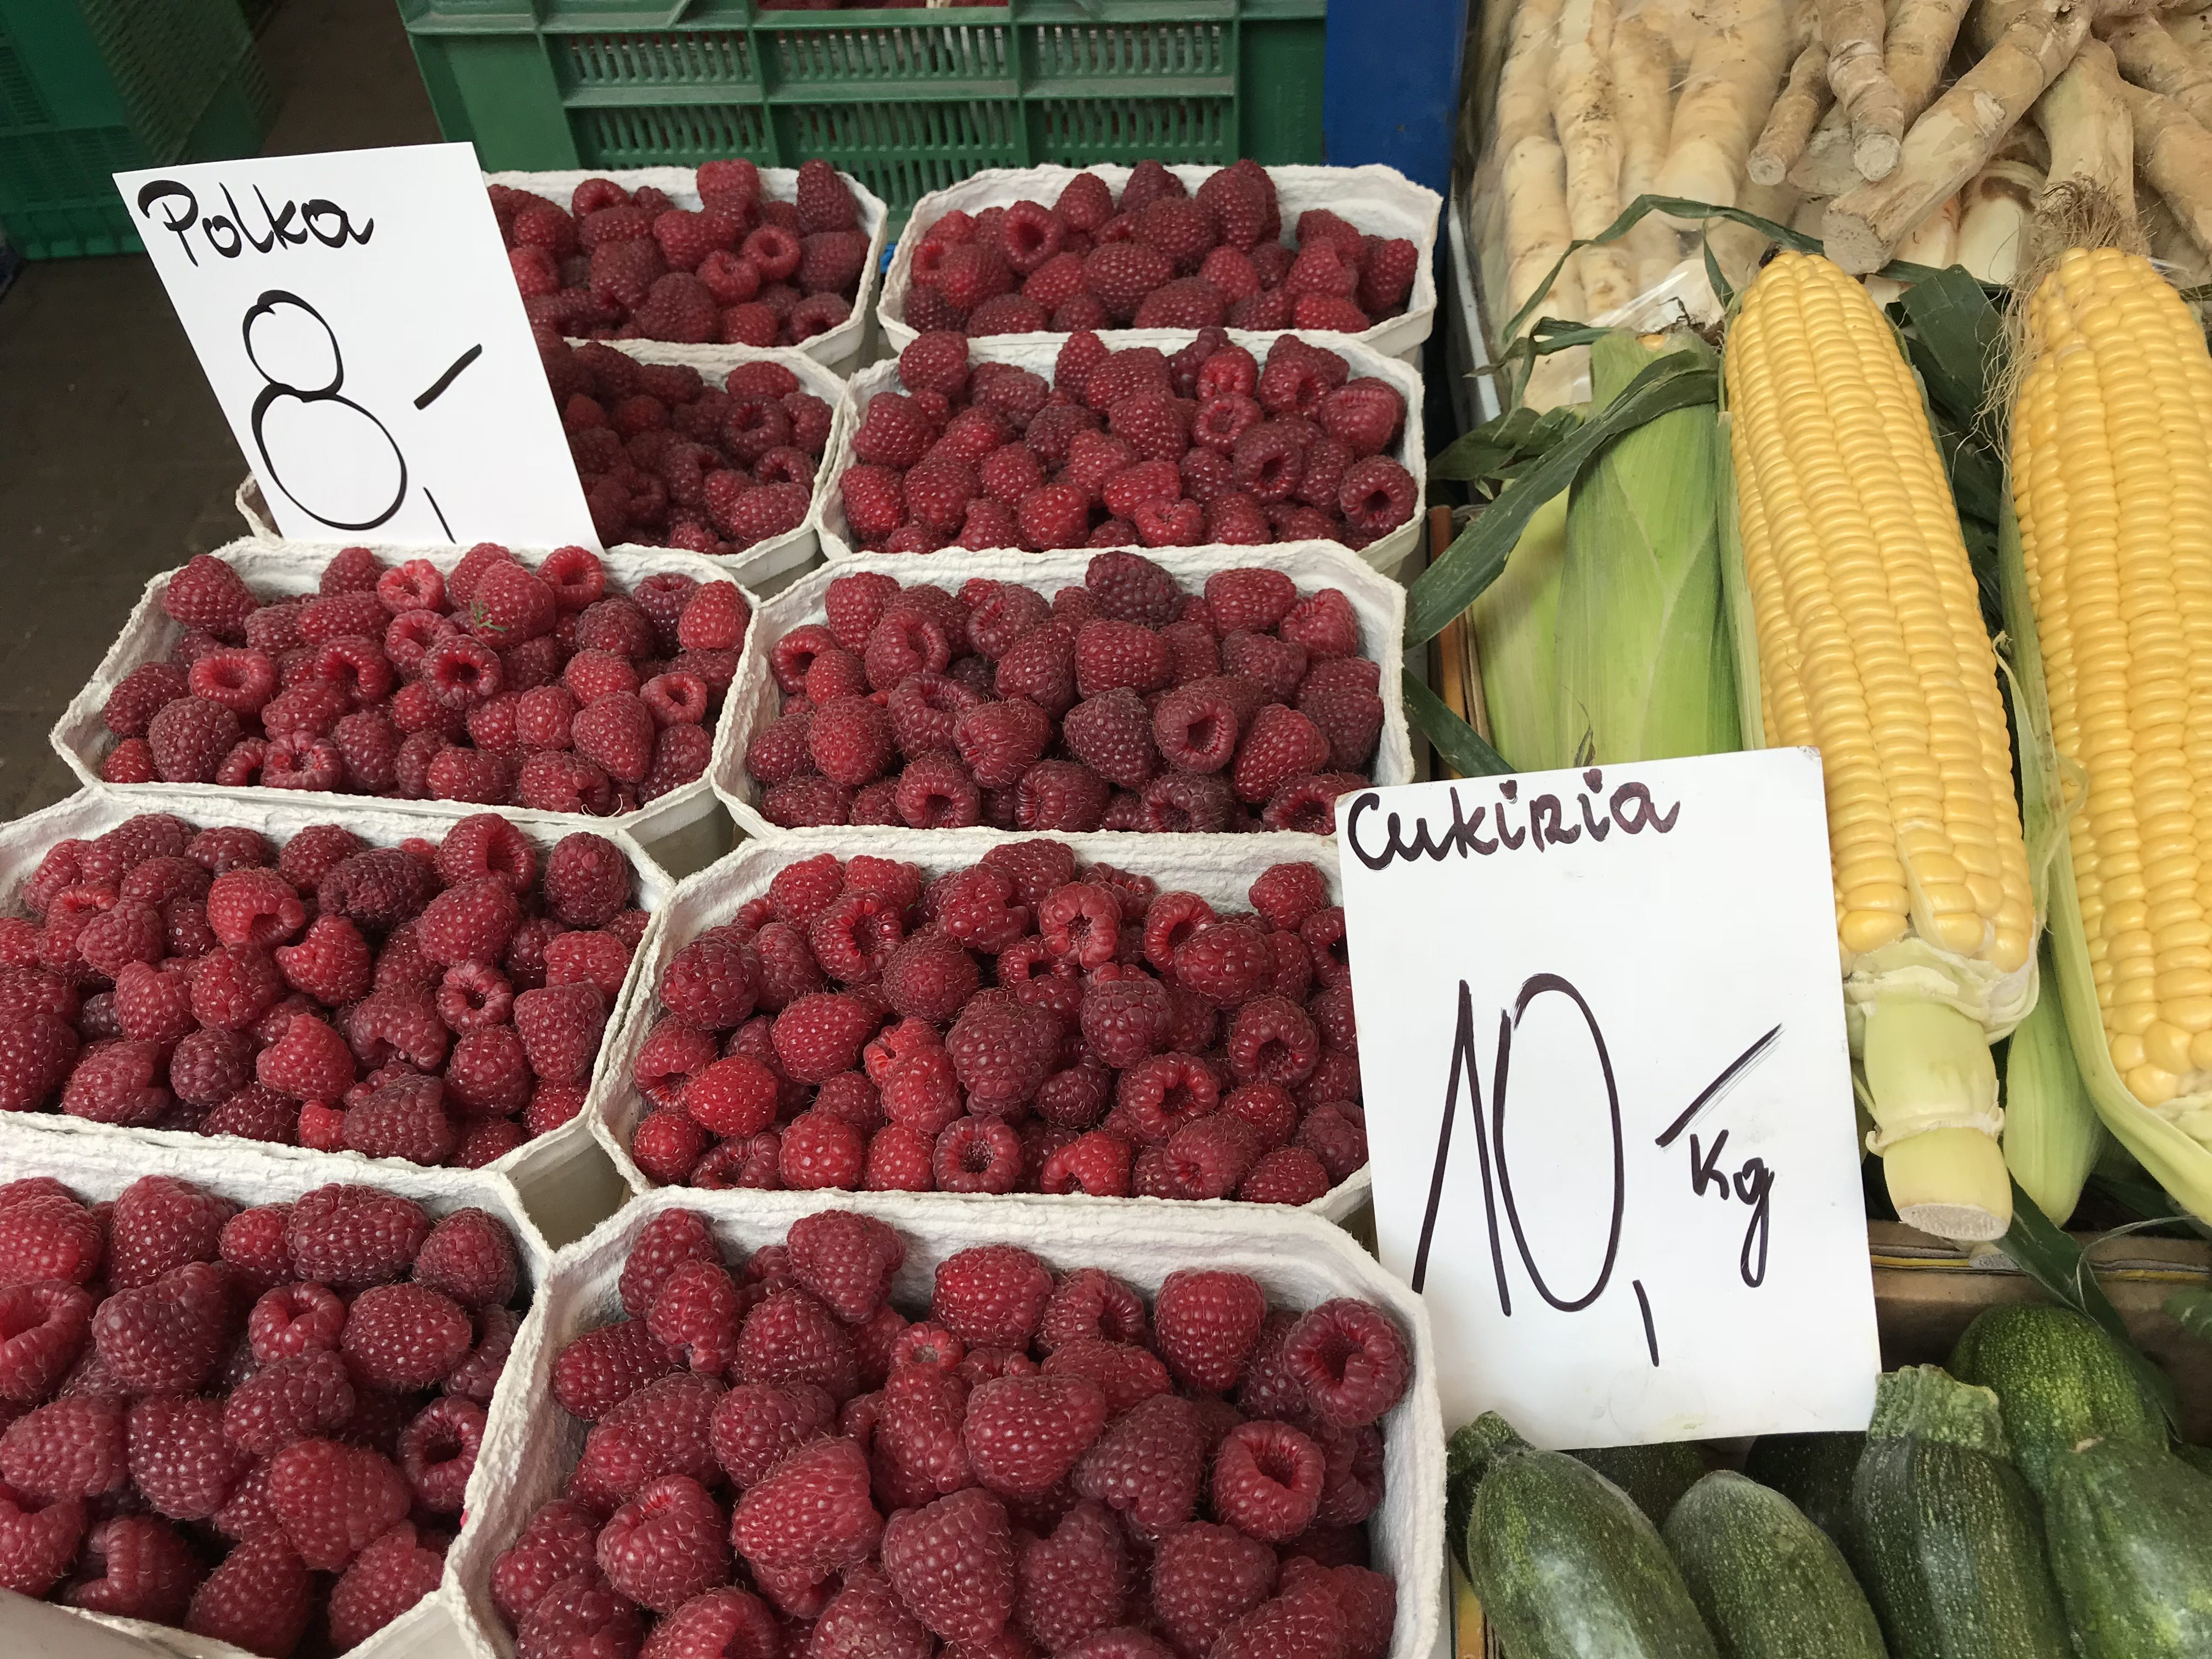 baskets of raspberries and corn on the cob